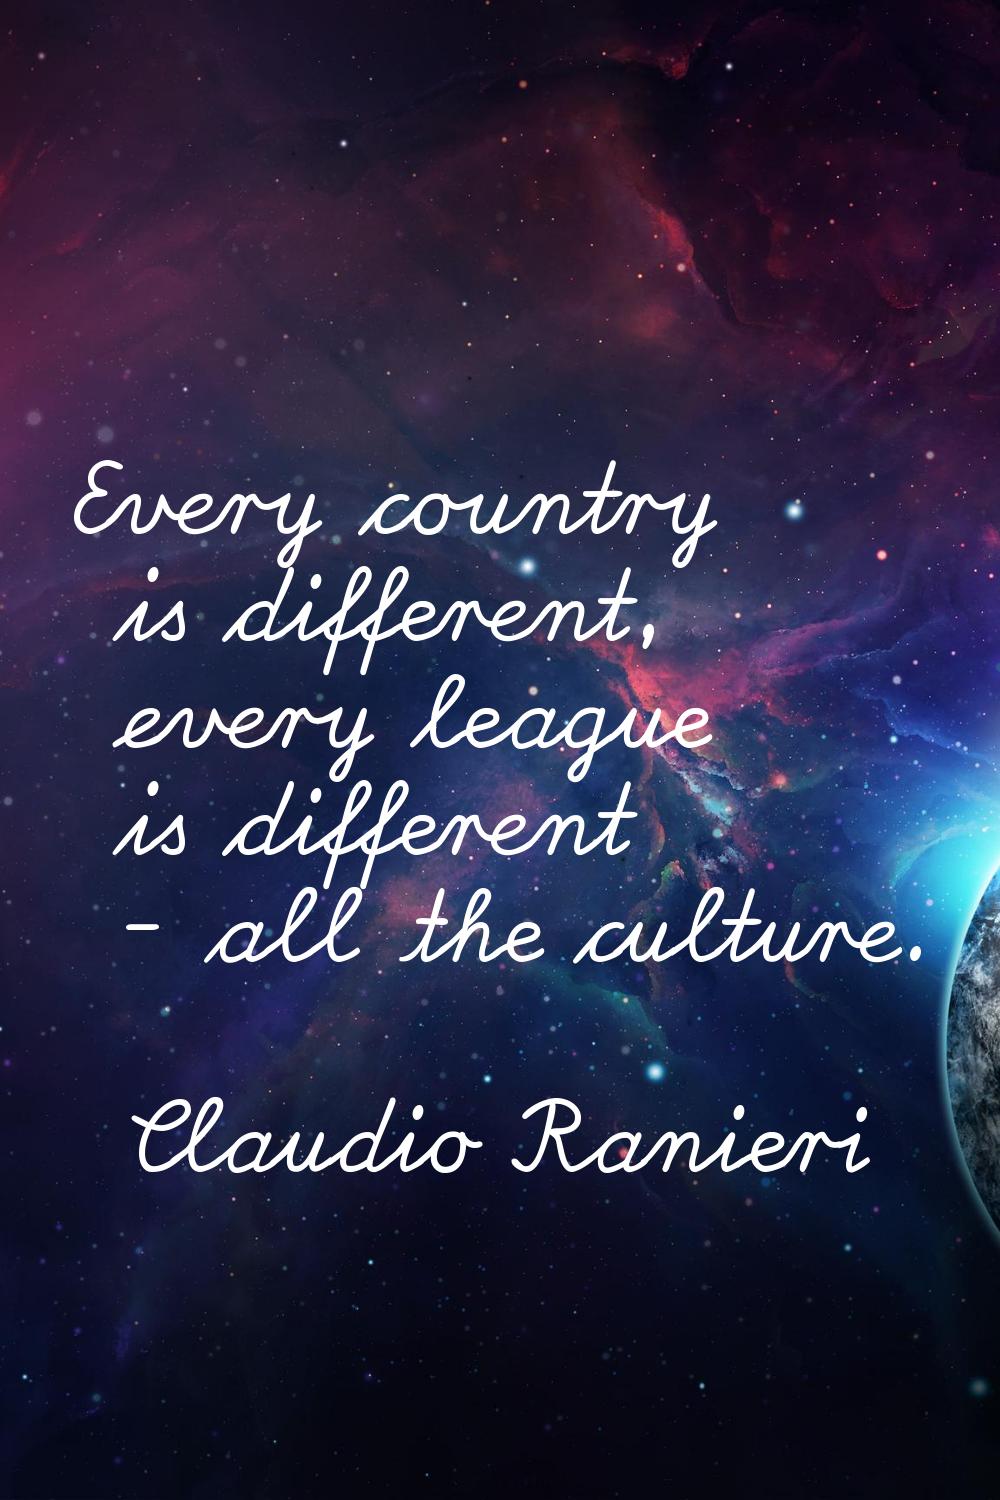 Every country is different, every league is different - all the culture.